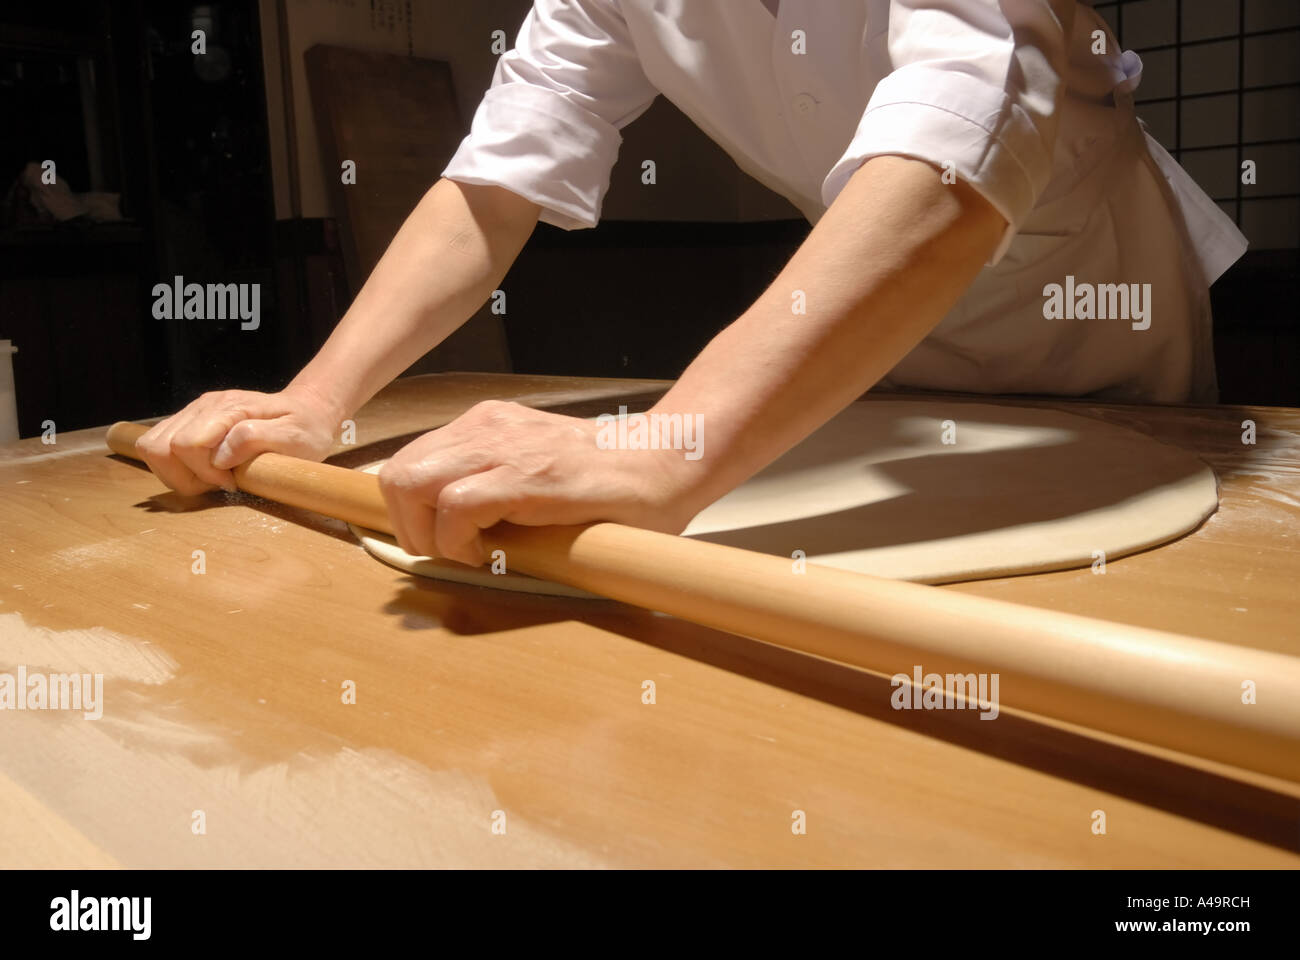 Mid section view of a chef rolling dough Stock Photo